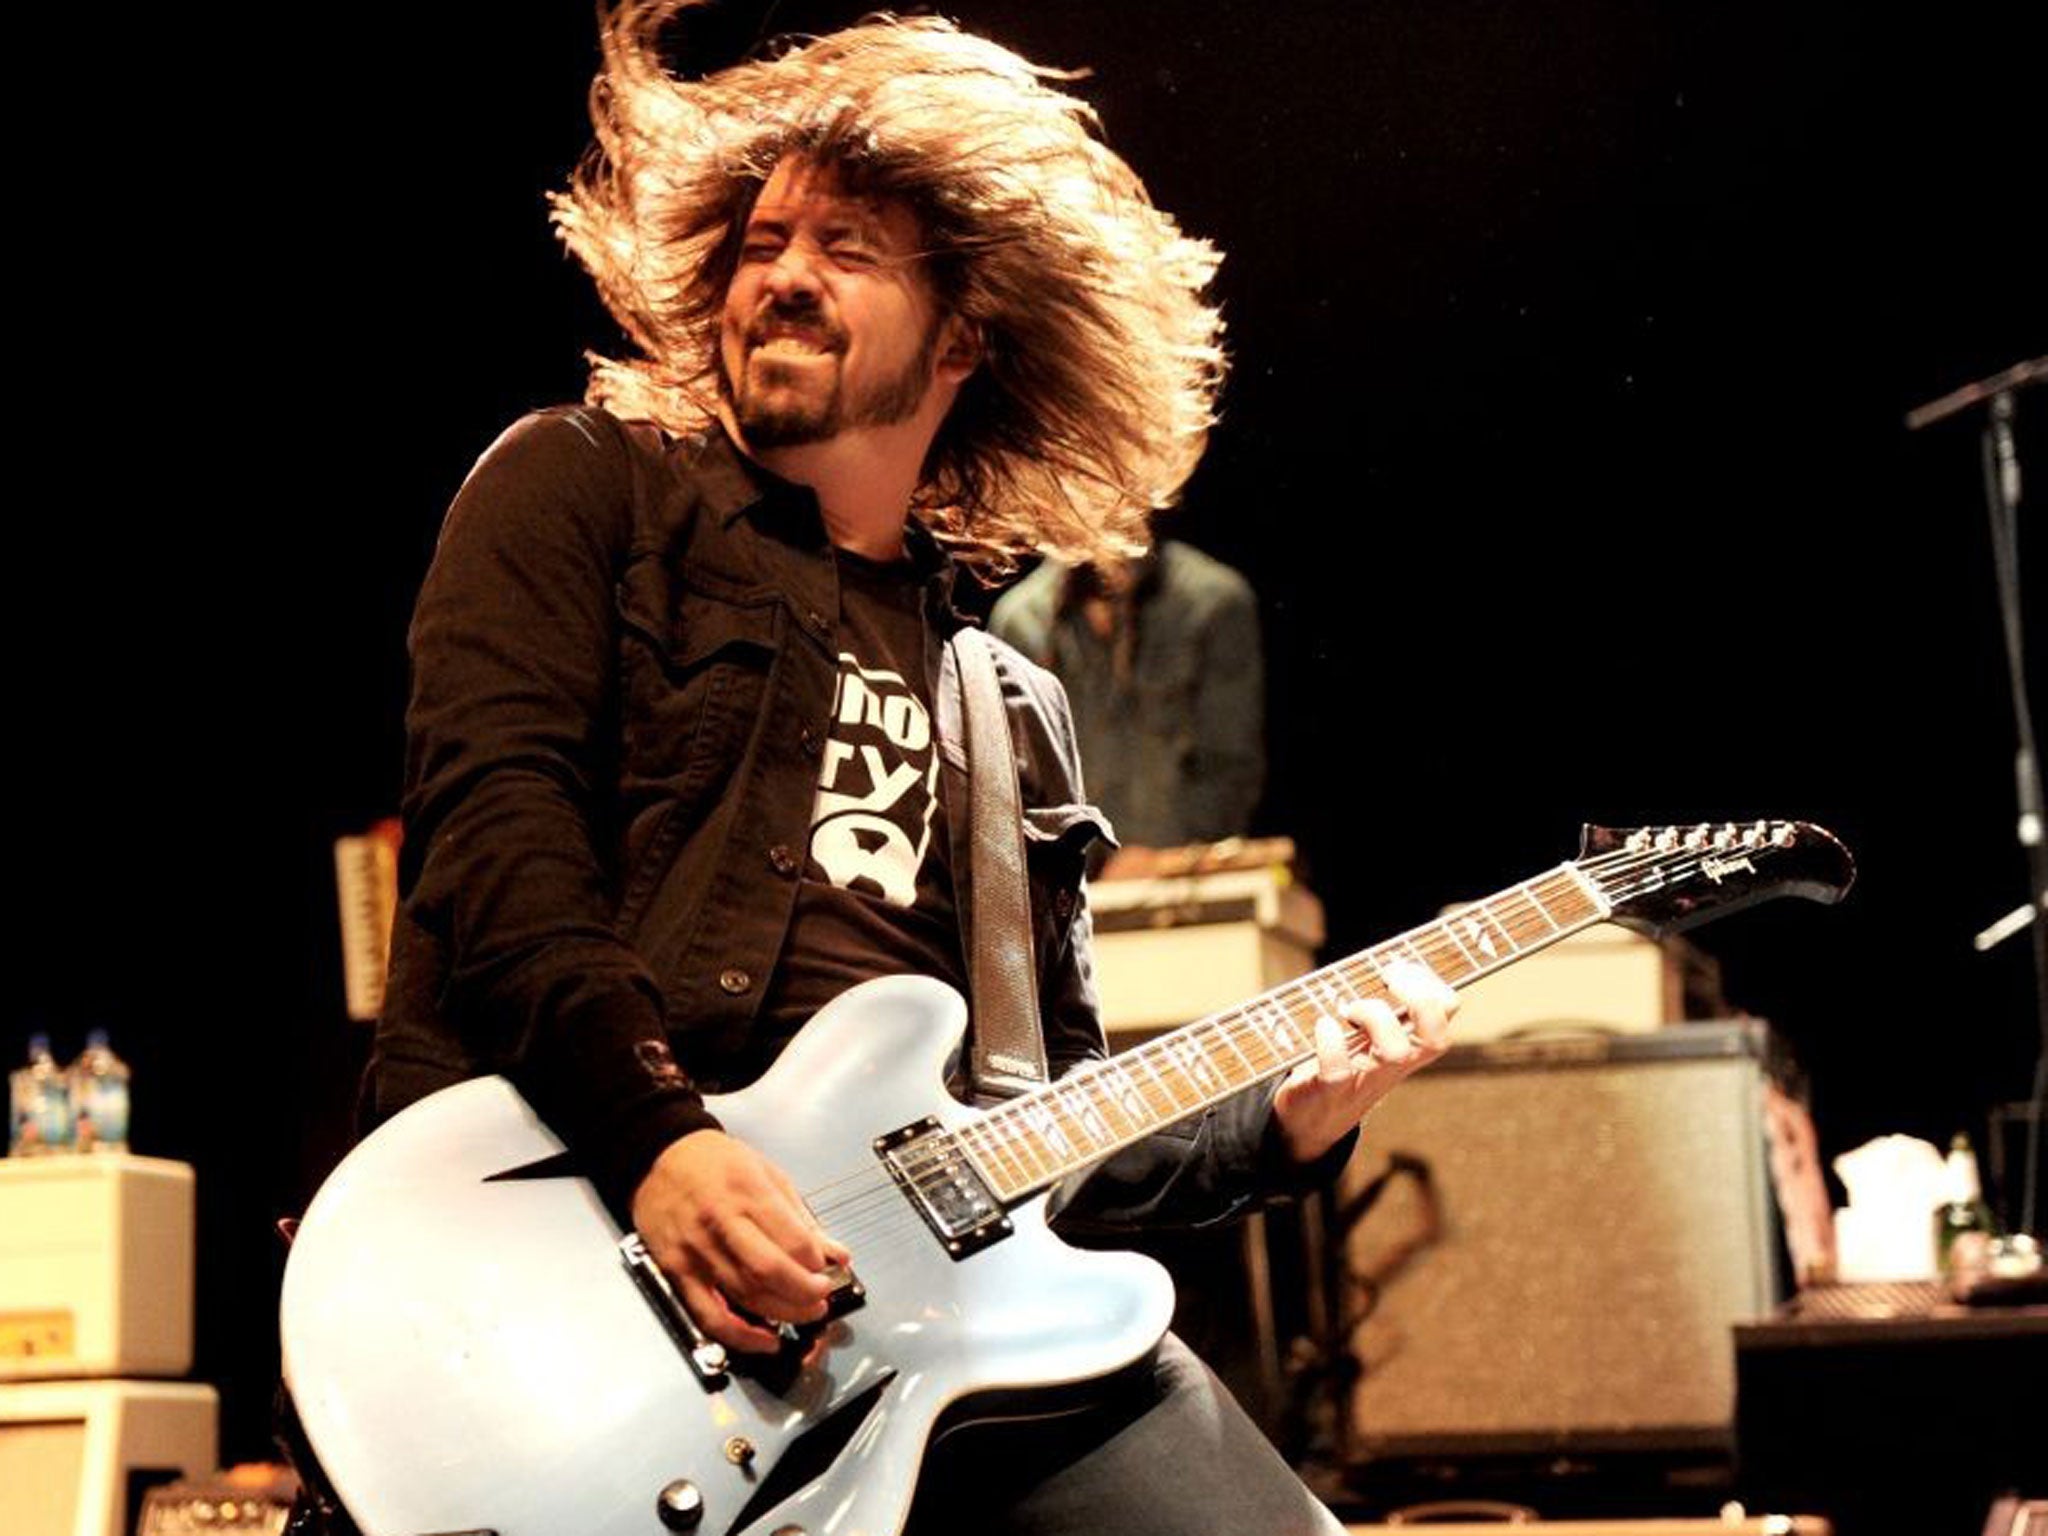 Foo Fighters use a 'tension and release' structure in many of their rock songs